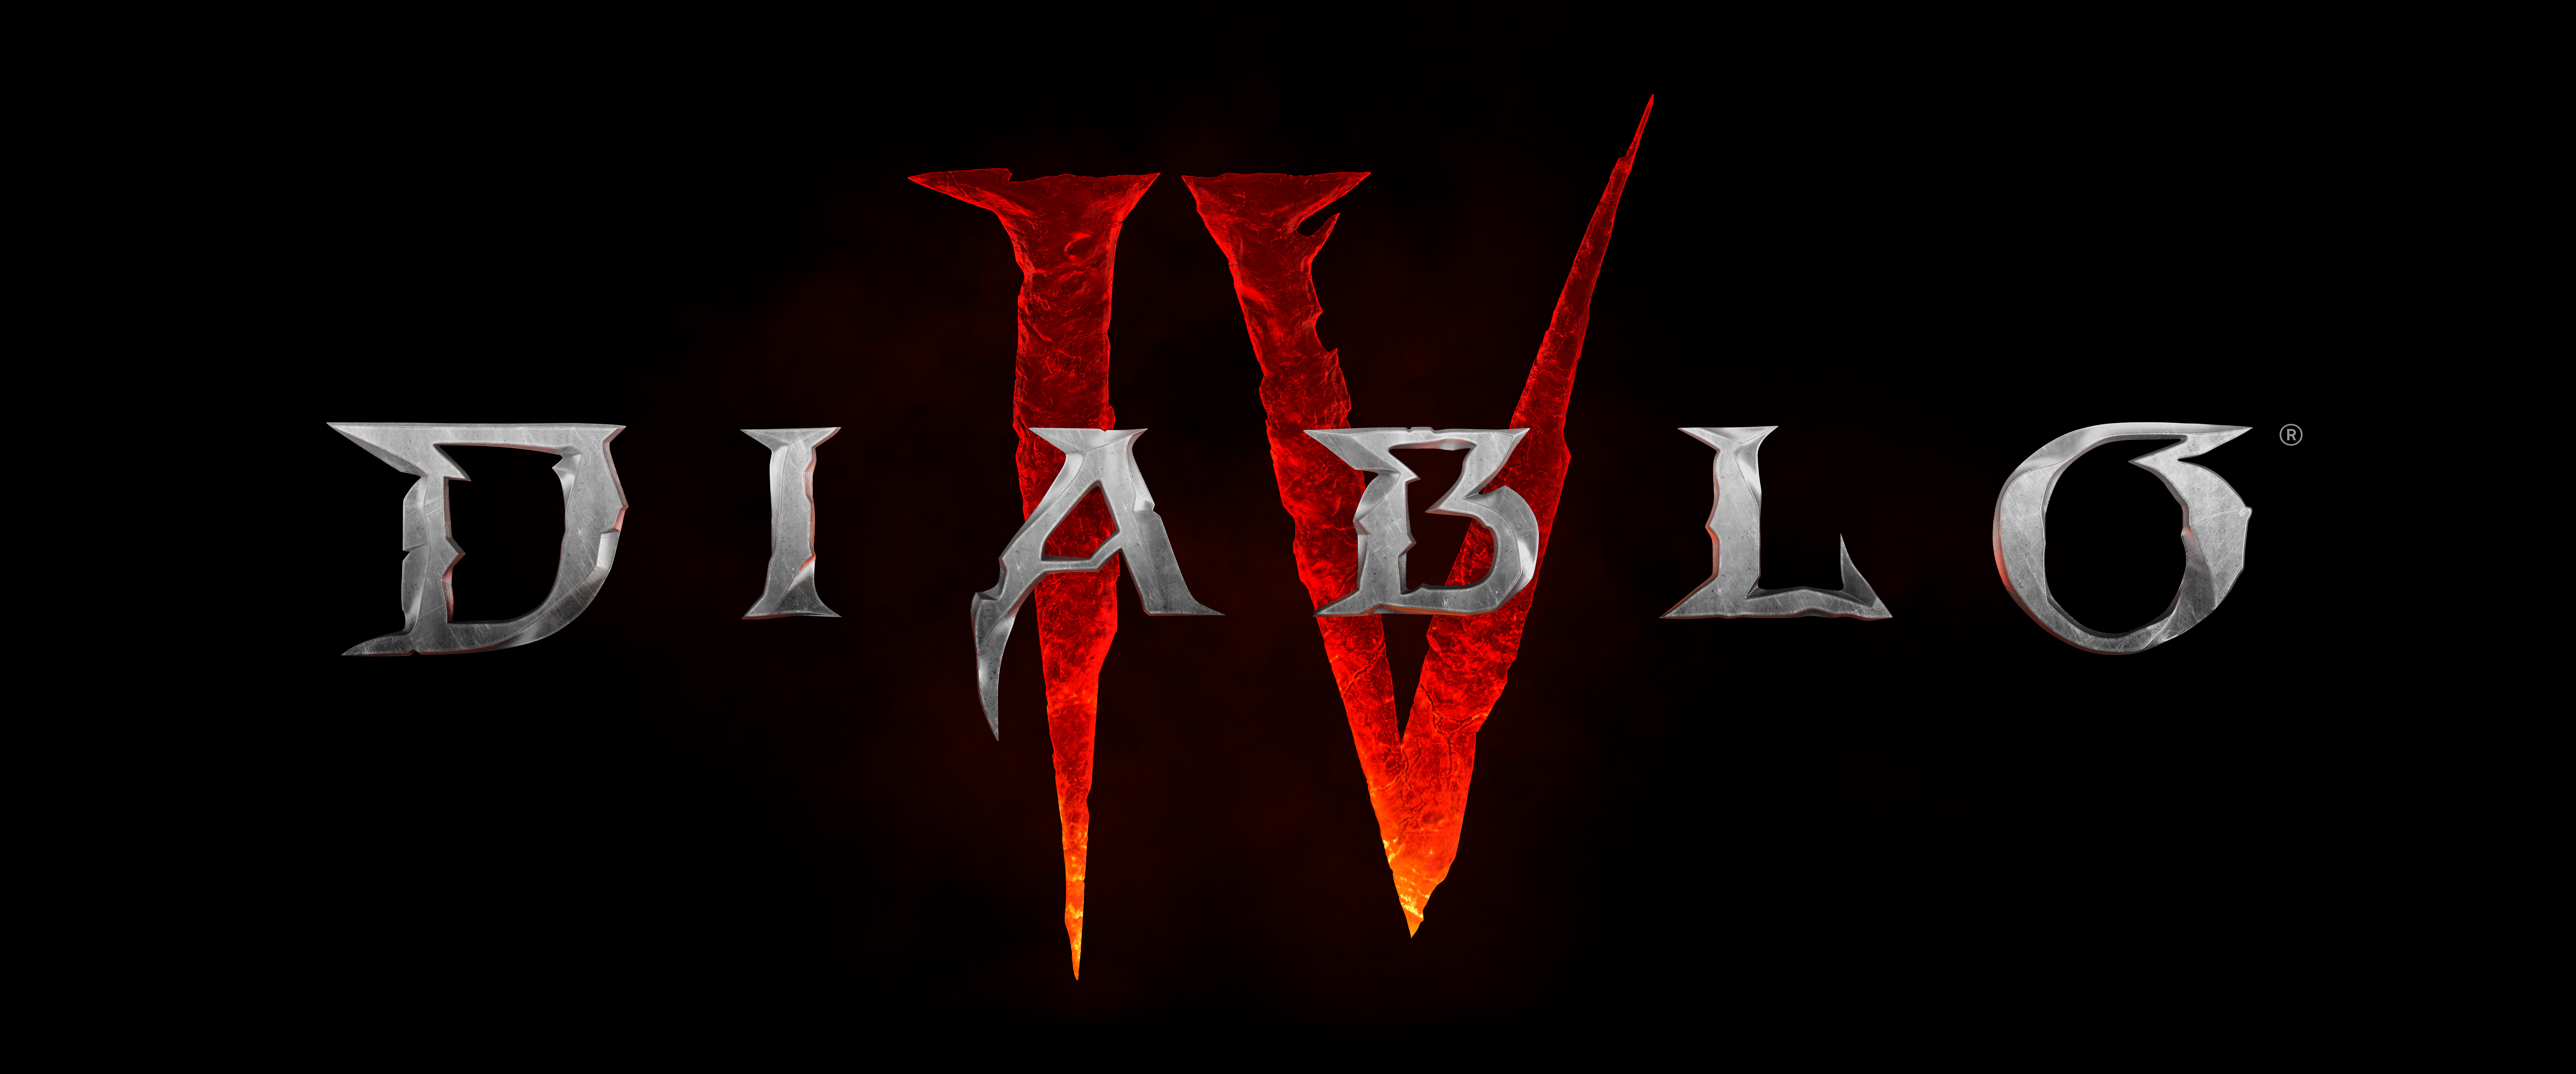 Diablo Franchise Releases its First New Class in 10 Years: Blood